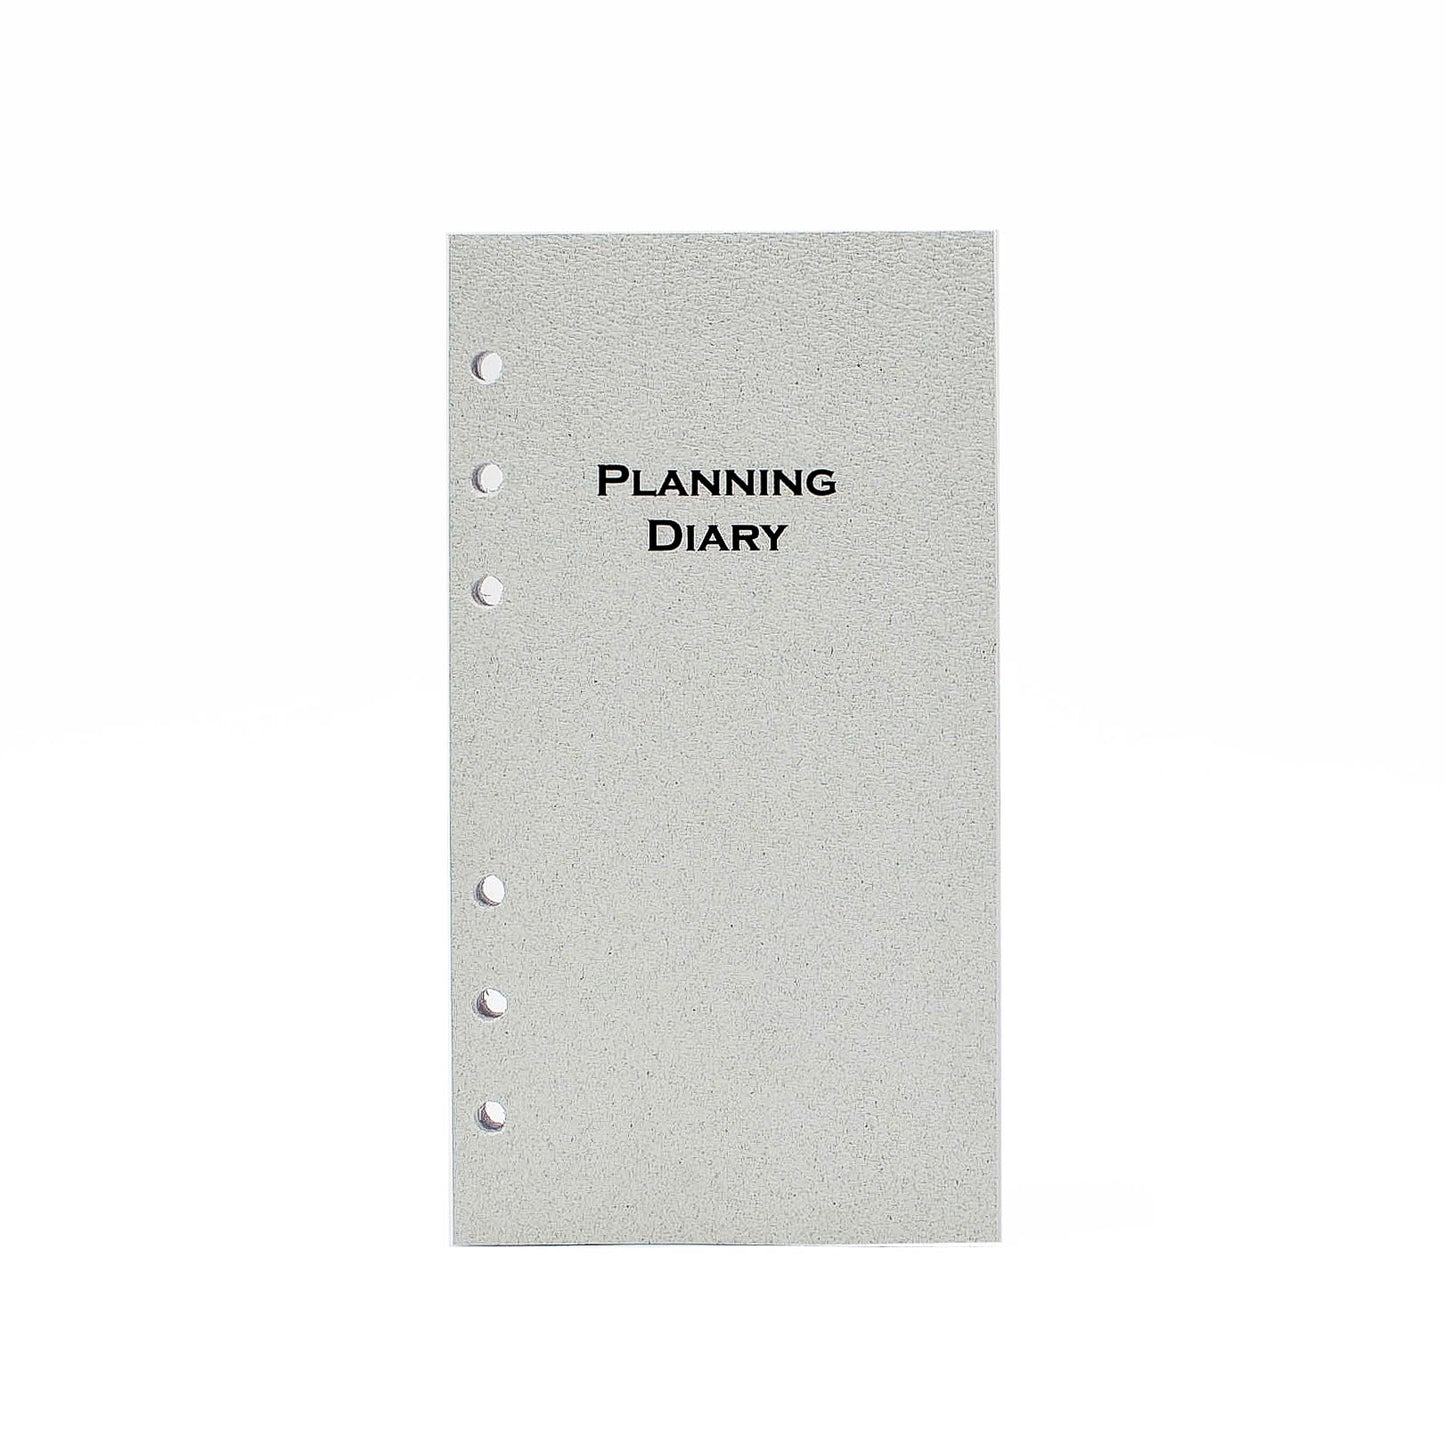 McCarthy Collection: MP46P6 3-3/4 x 6-3/4 6-Hole Planner